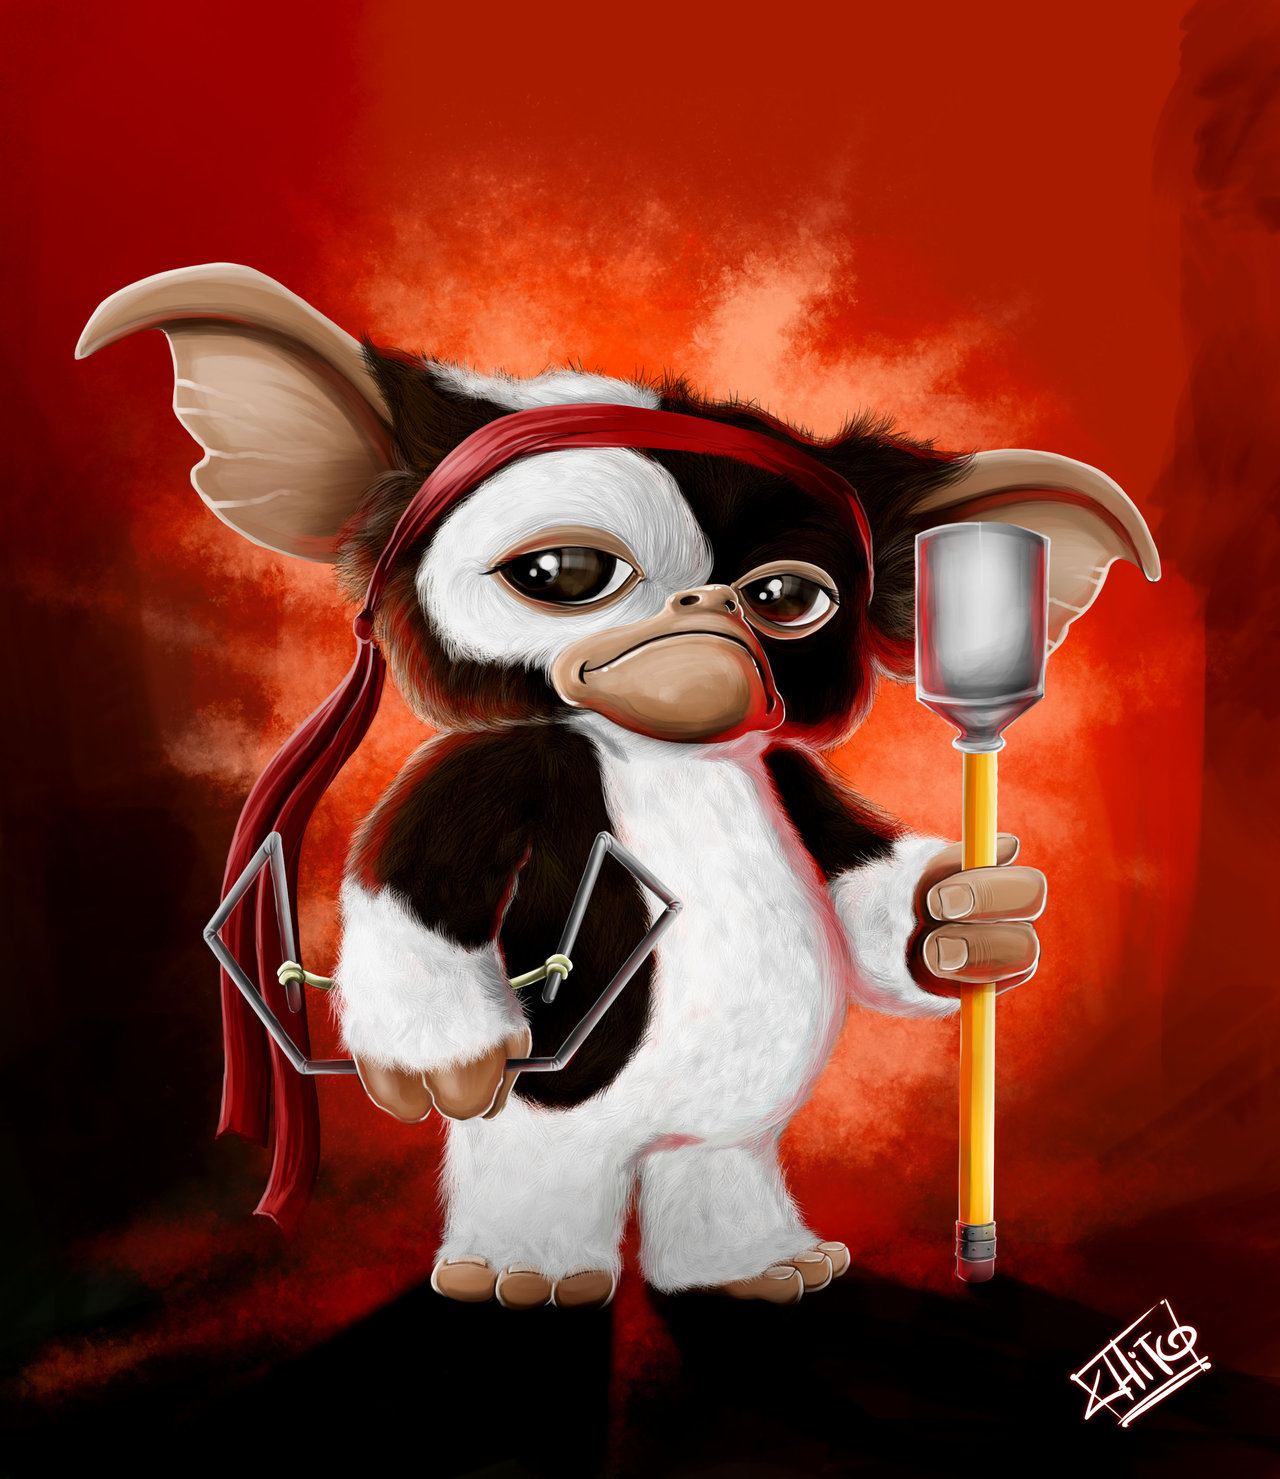 Free Download Gizmo Wallpaper Gizmo Rambo By Manudgi 1280x1479 For Your Desktop Mobile Tablet Explore 73 Gremlins Gizmo Wallpaper Gremlins Wallpaper Gizmo Wallpaper Amc Gremlin Wallpaper